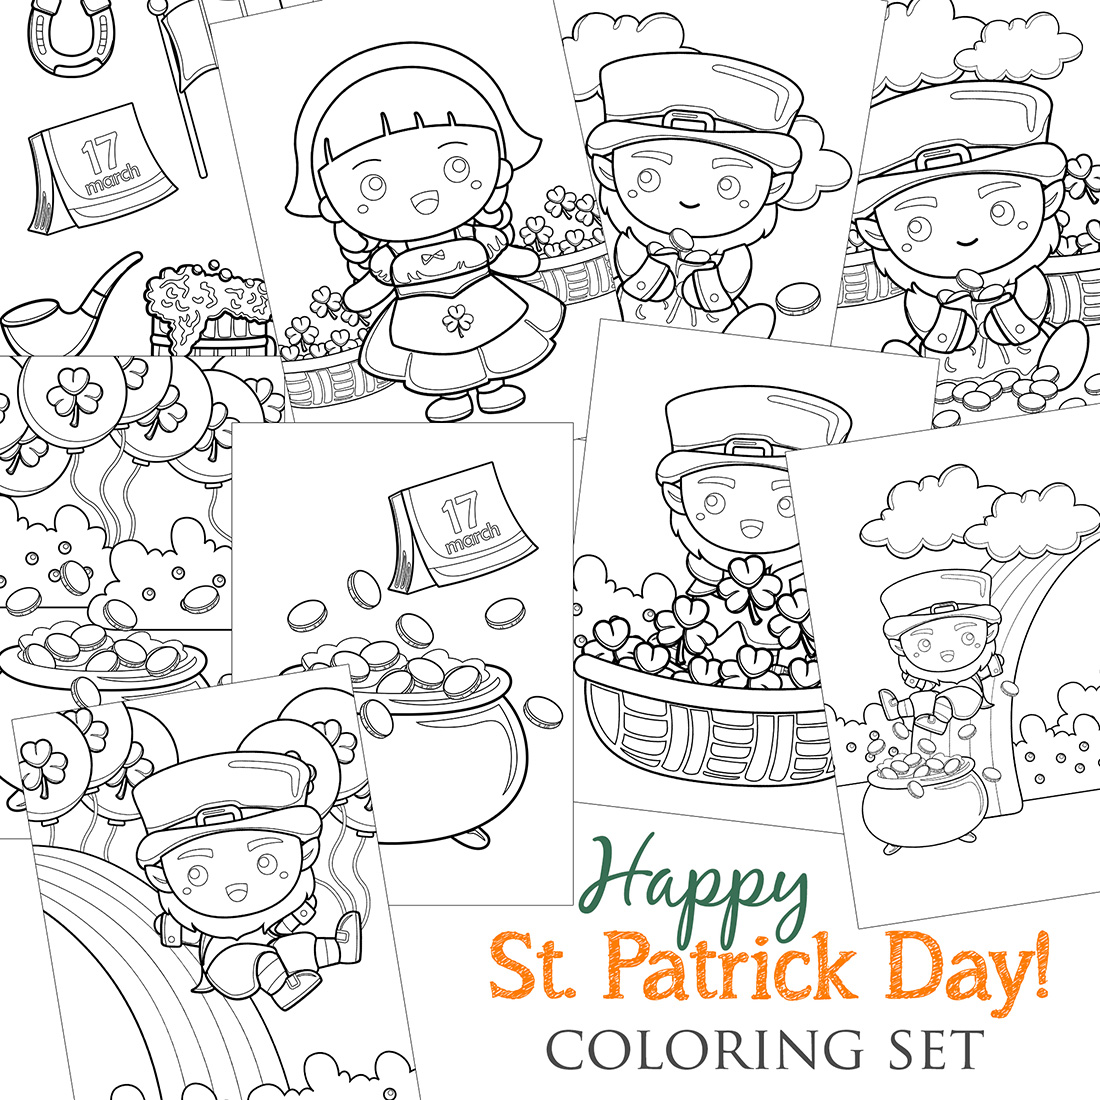 St Patrick Day Holiday Irish Green Coloring Pages Activity For Kids And Adult cover image.